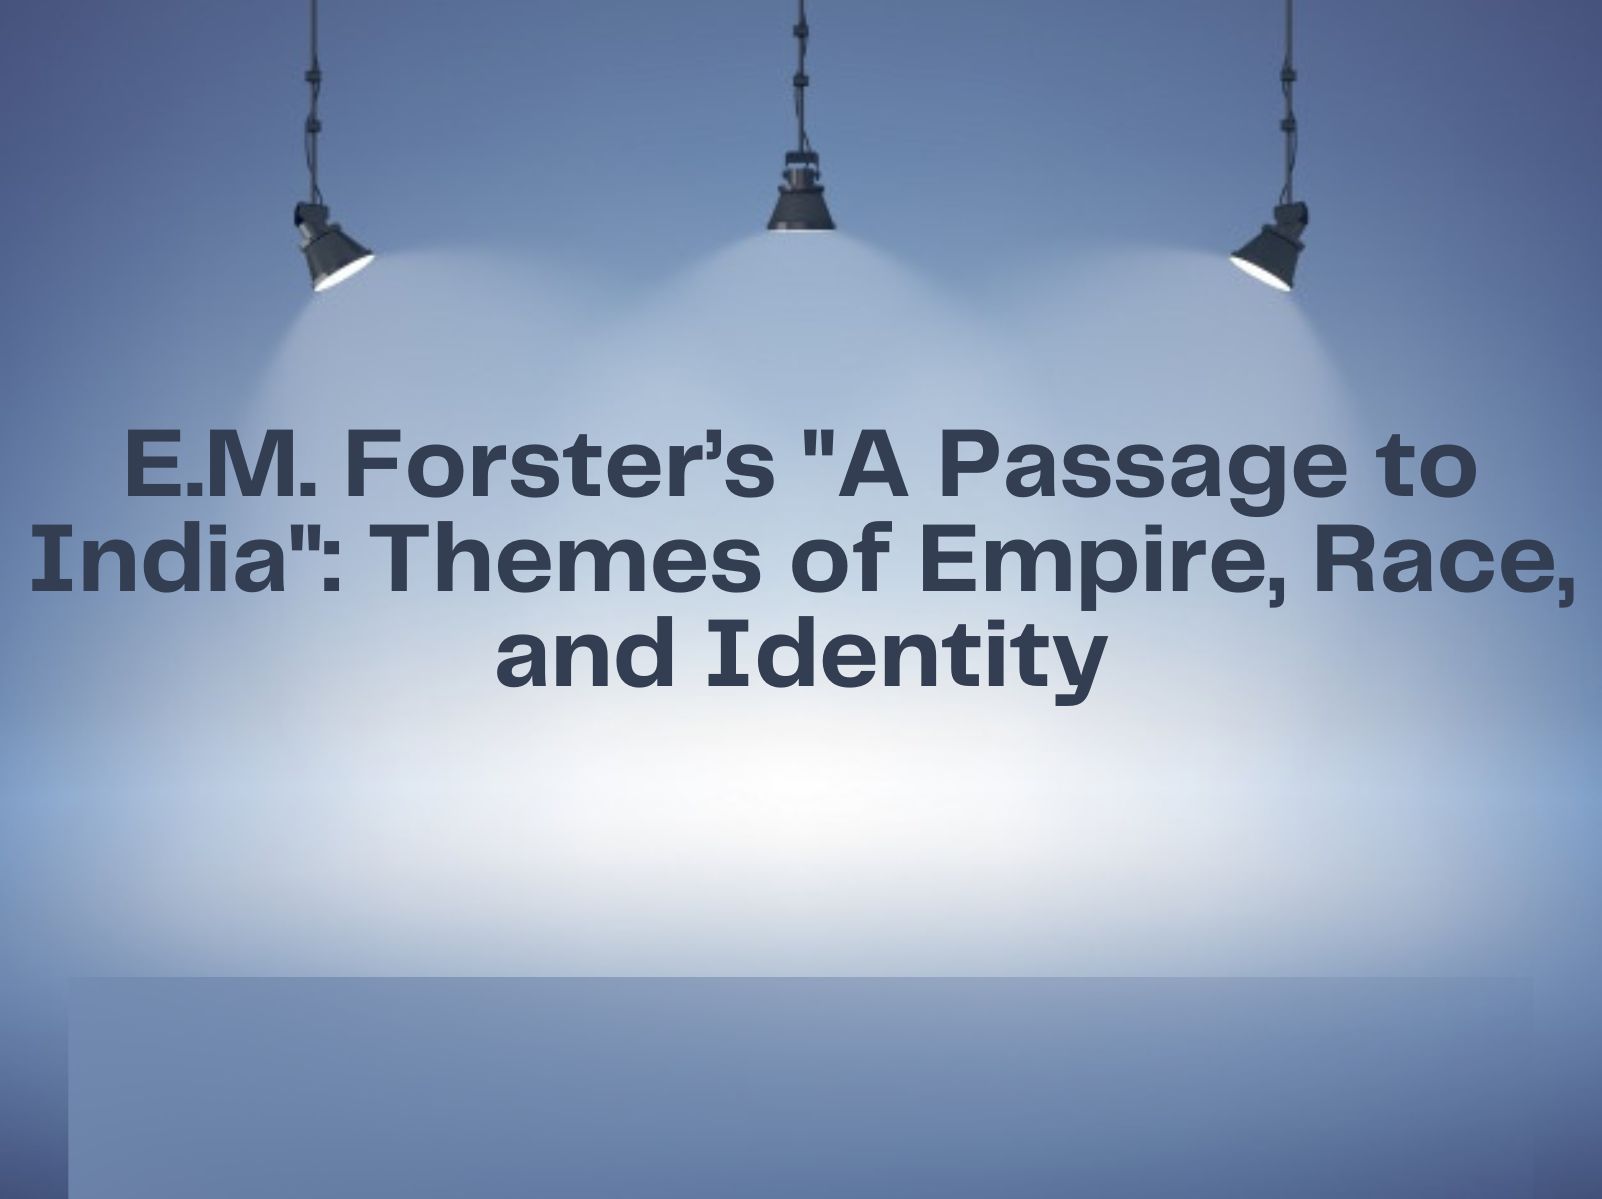 E.M. Forster’s A Passage to India Themes of Empire, Race, and Identity